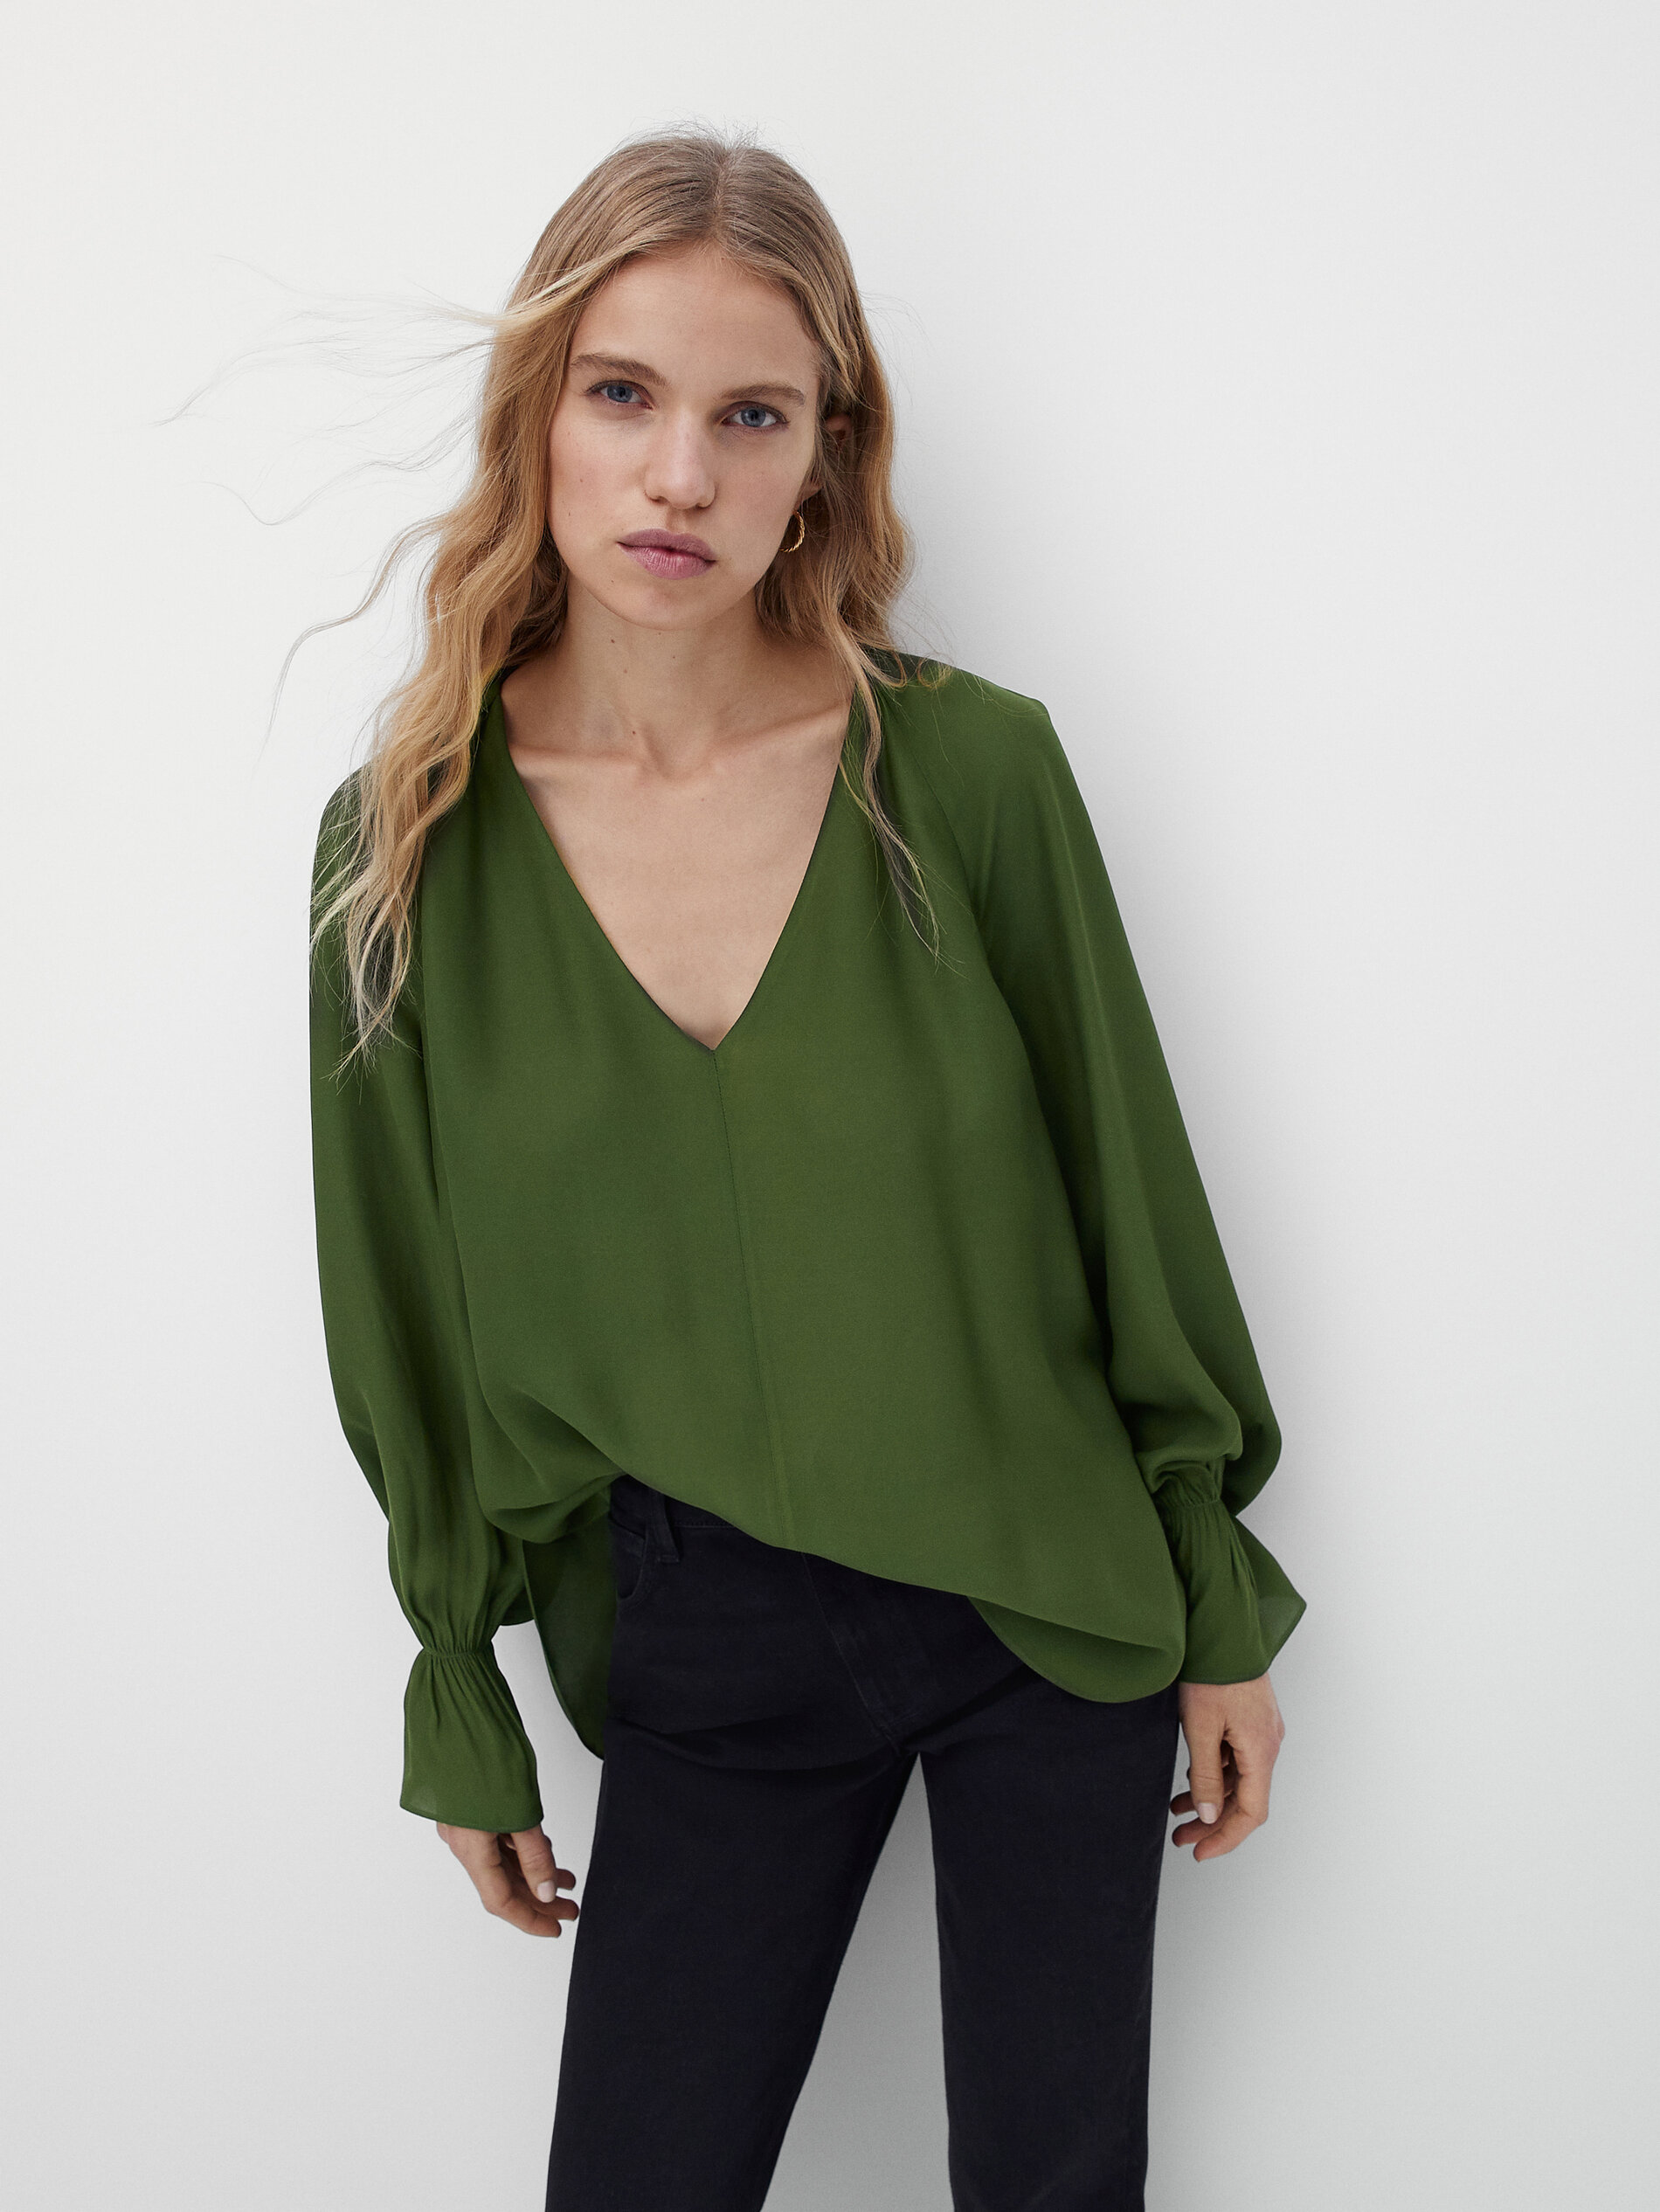 Massimo Dutti - Flowing shirt with frilled cuffs